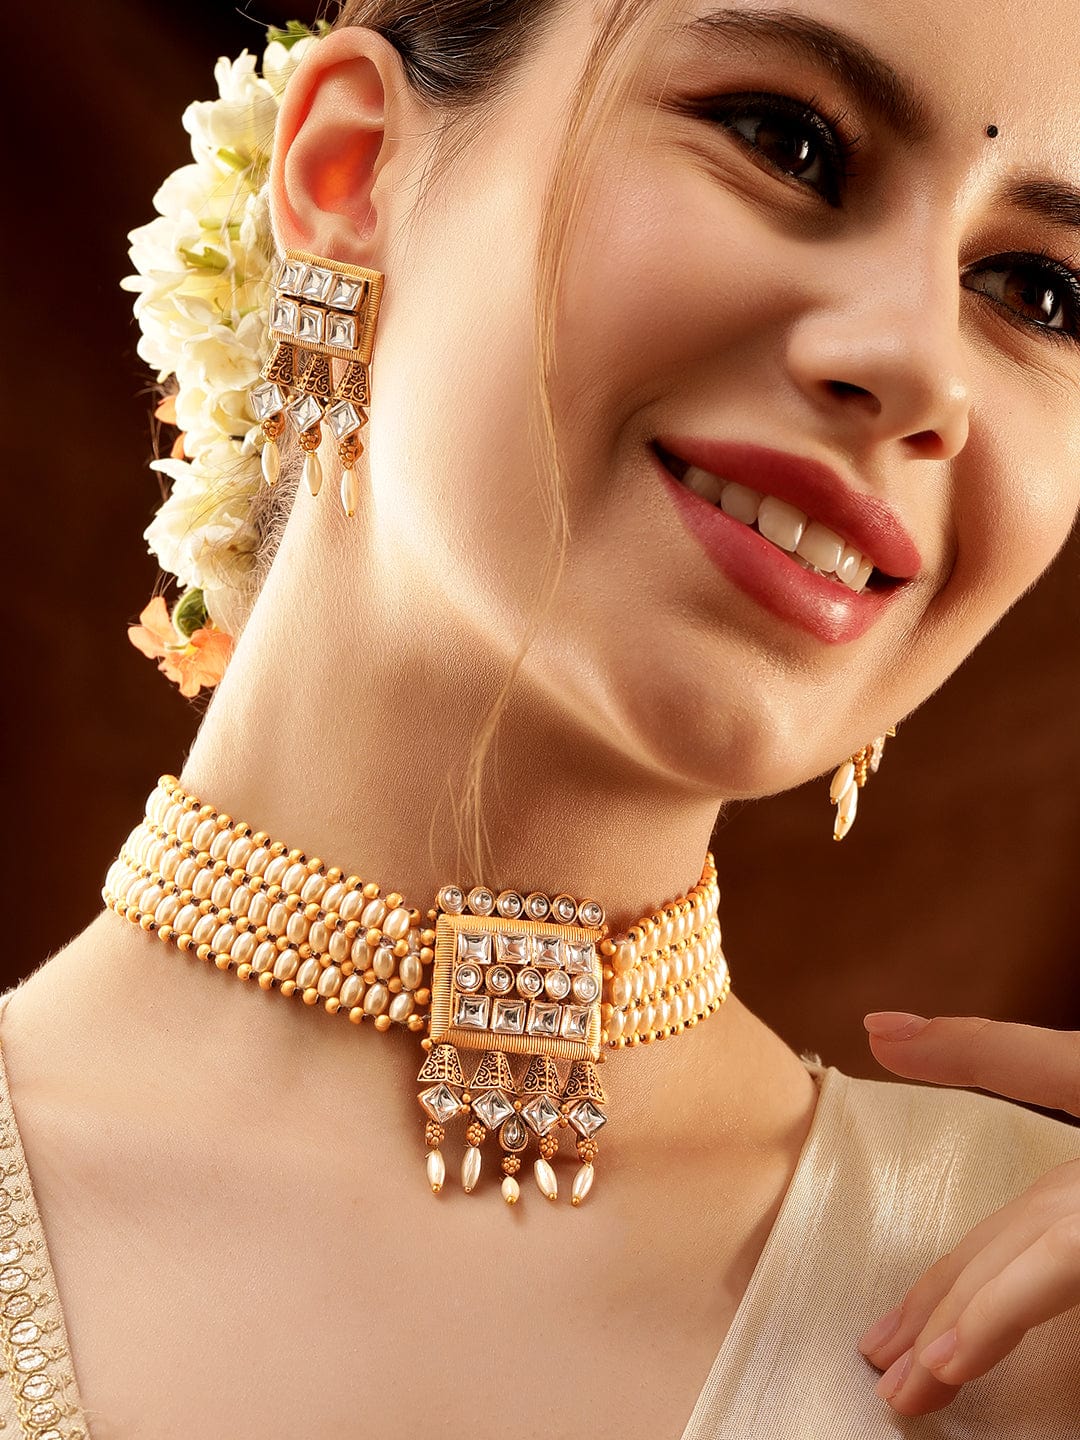 Bridal Bliss: Jewelry for Every Stage of Your Wedding Day